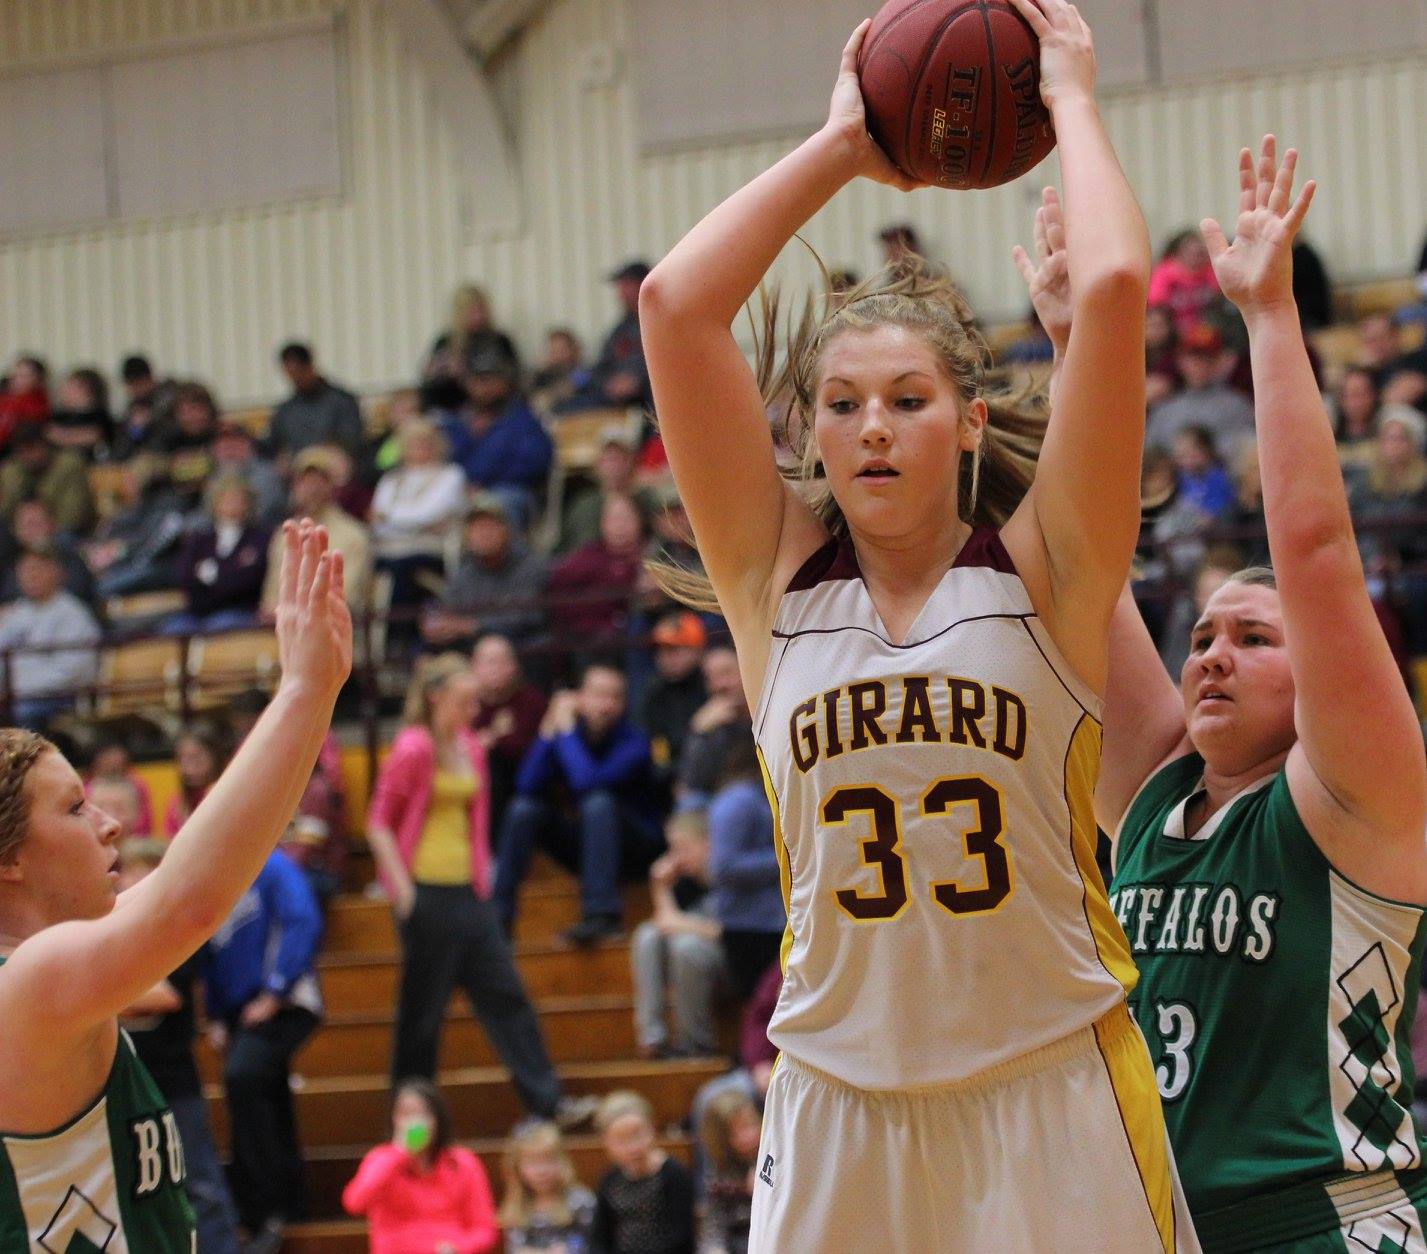 Ashley Ray led the Lady Trojans with 12 points in their 48-21 win over Prairie View on Friday. PHOTO BY JOYCE KOVACIC